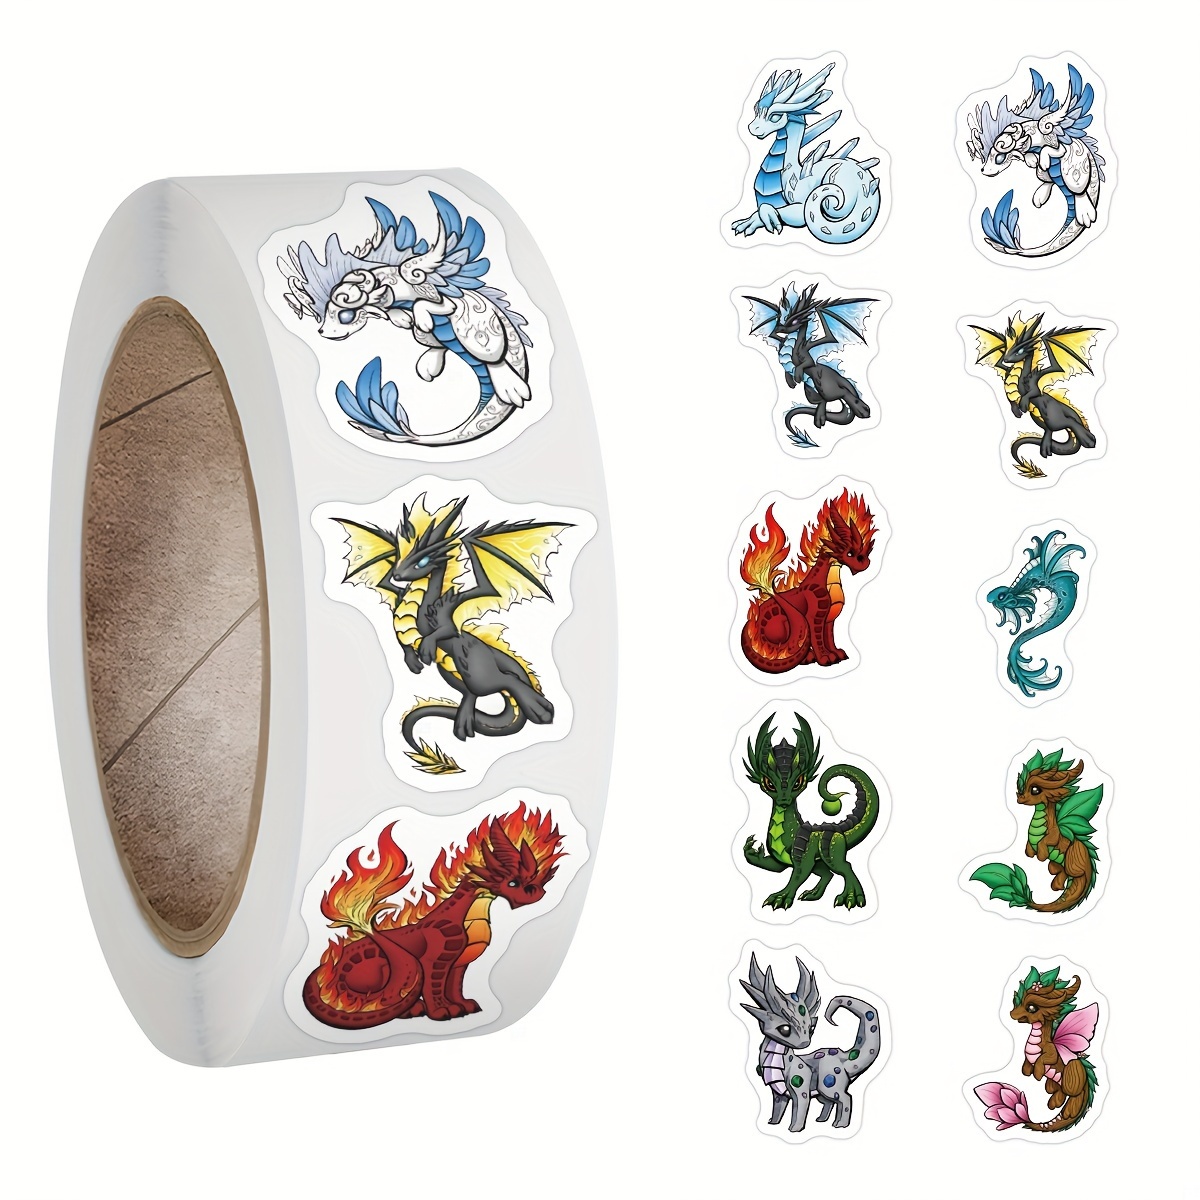  50 PCS Cool Kids Dragon Stickers and Decals, Fantasy Stickers  for Kids Teens Adults, Dragon Party Favors Waterproof Vinyl Stickers for  Water Bottle Laptop Luggage Guitar : Electronics